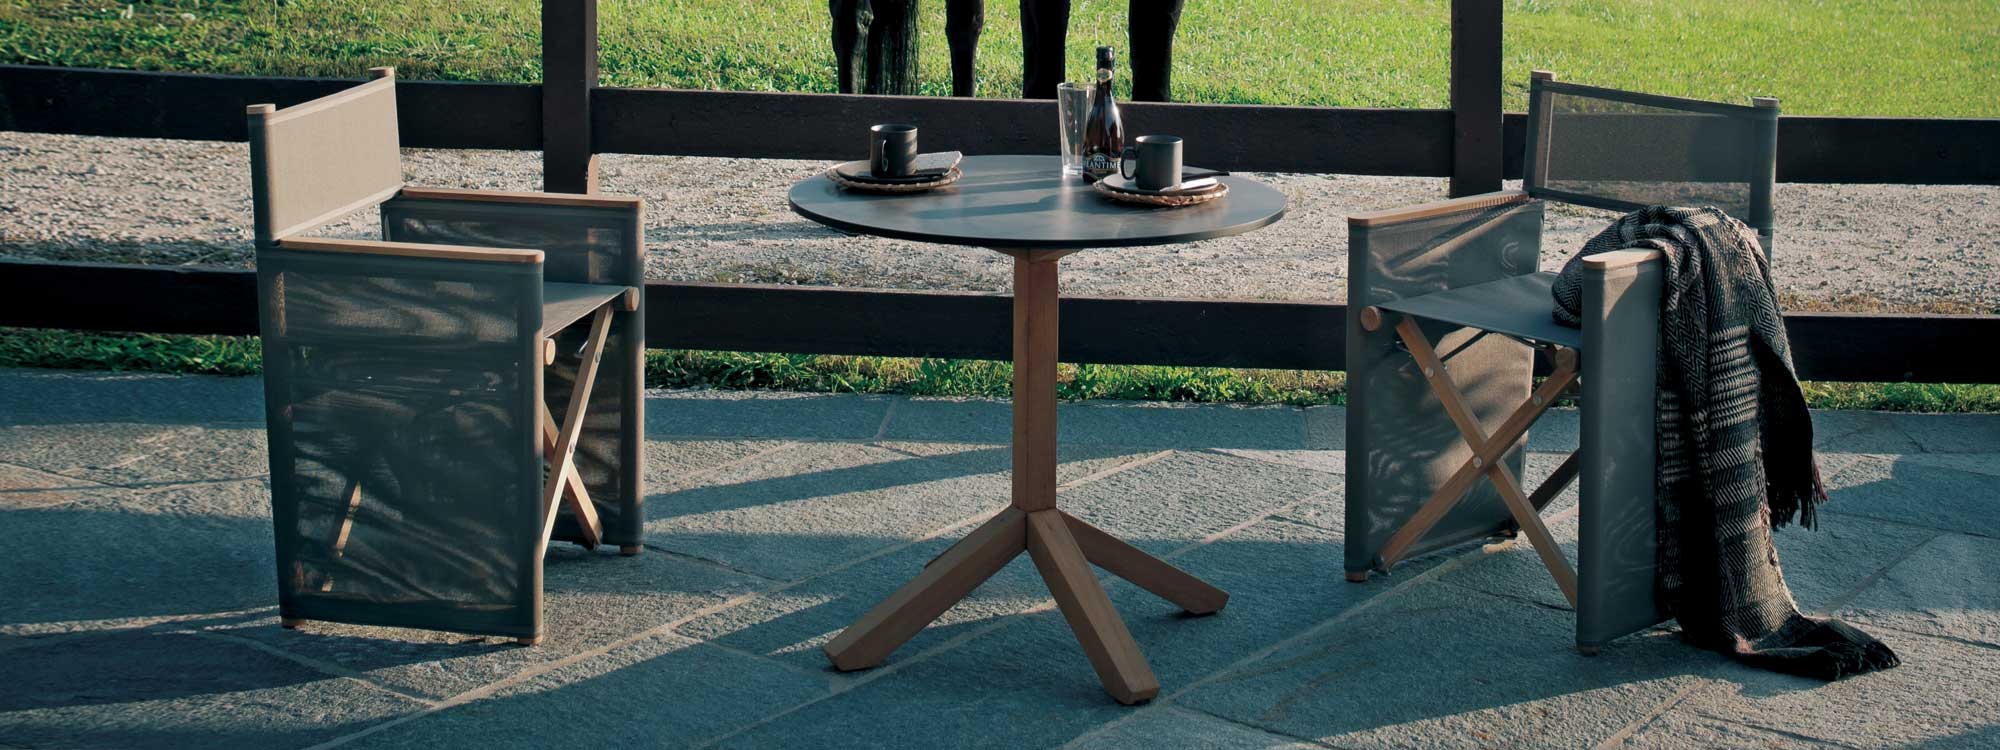 Image of Root small teak table with grey HPL top, together with pair of Orson garden director chairs by RODA